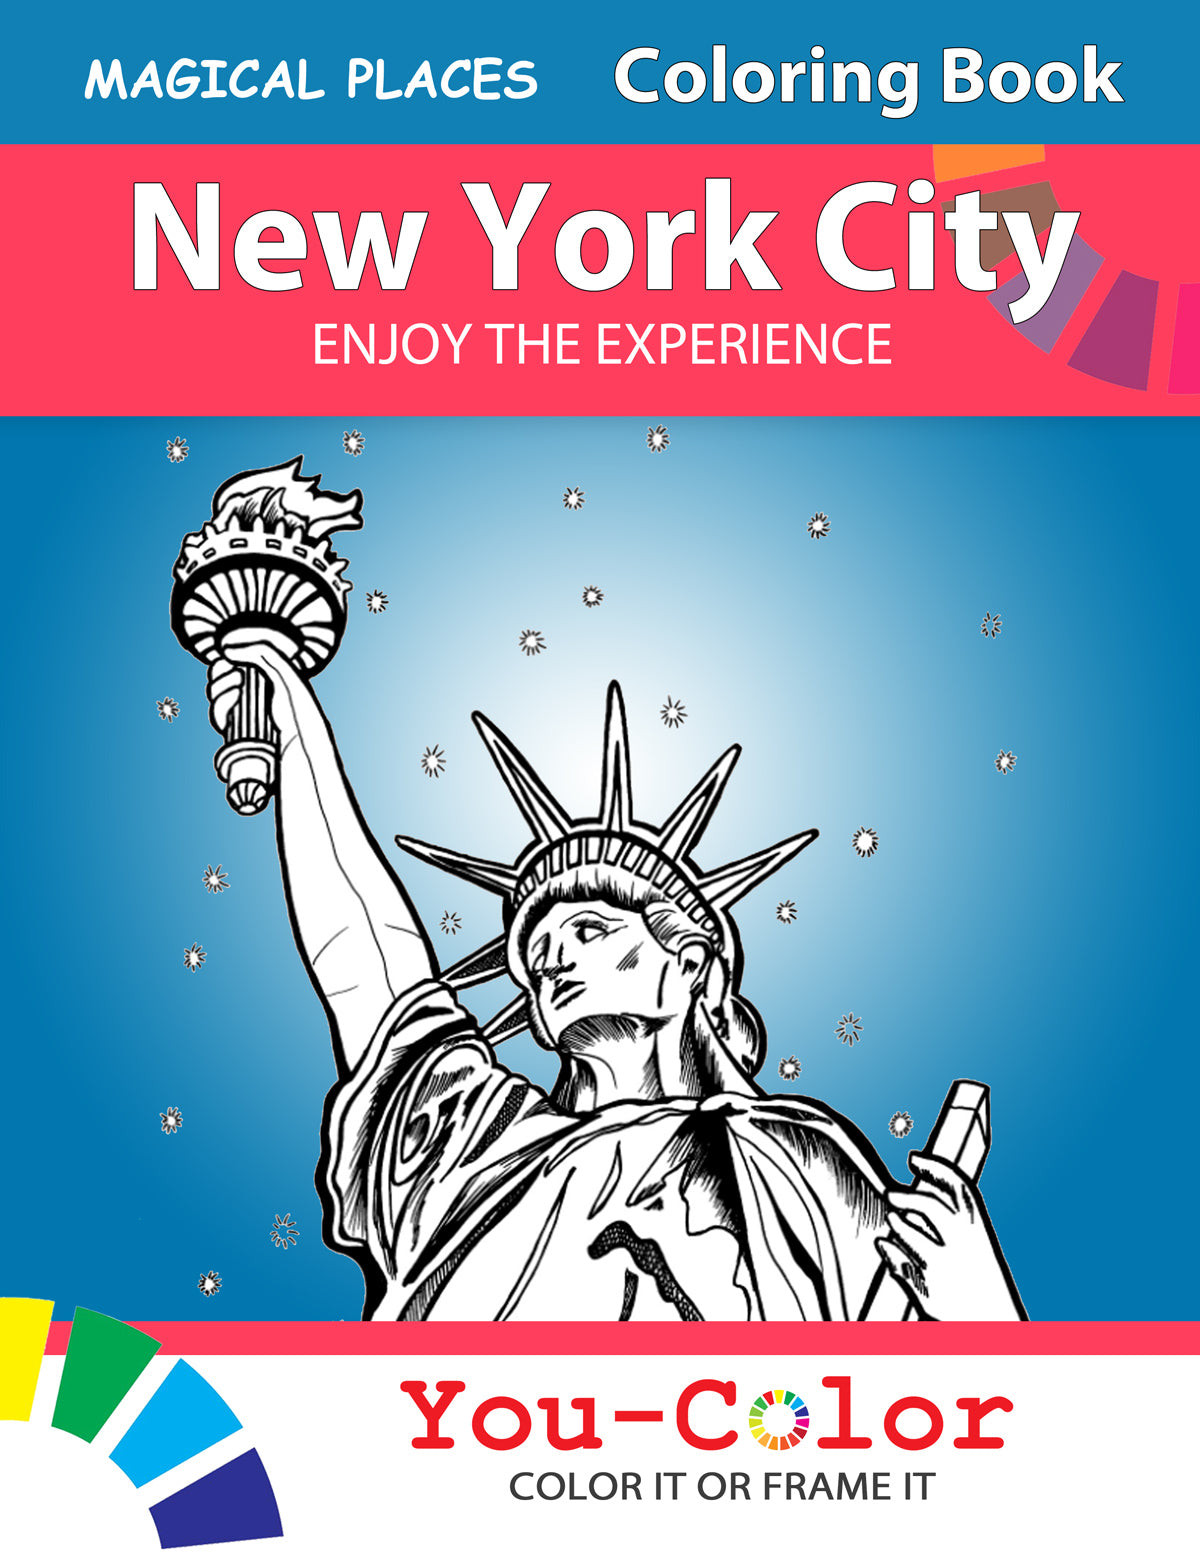 Big New York City Coloring Book: Magical Places Coloring Book - You-Color